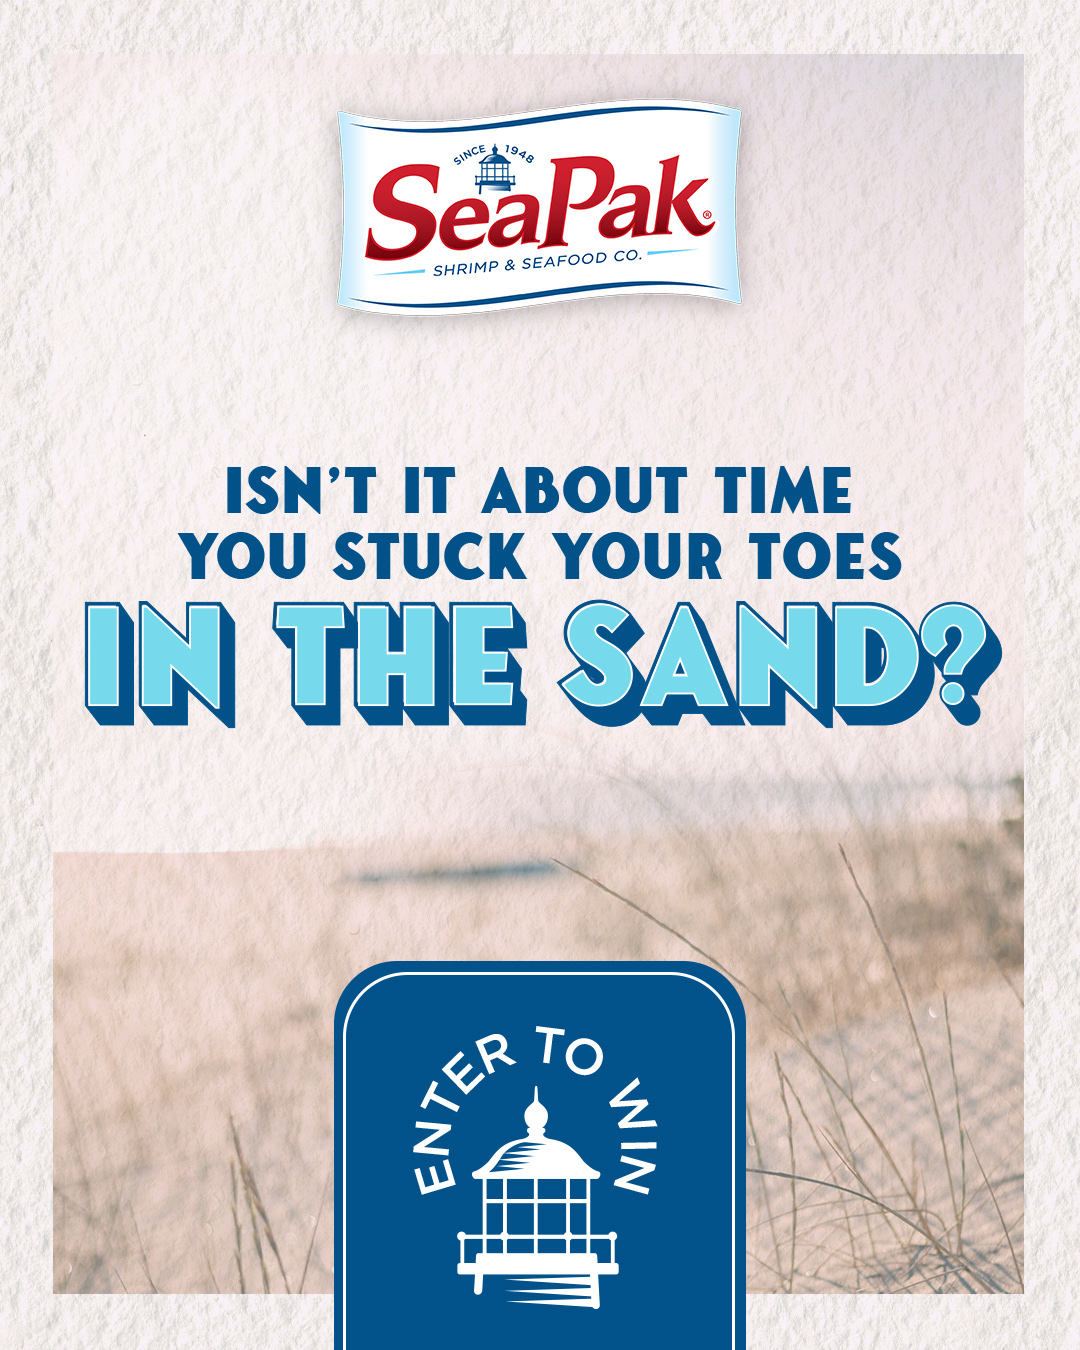 SeaPak believes in sea access for all.